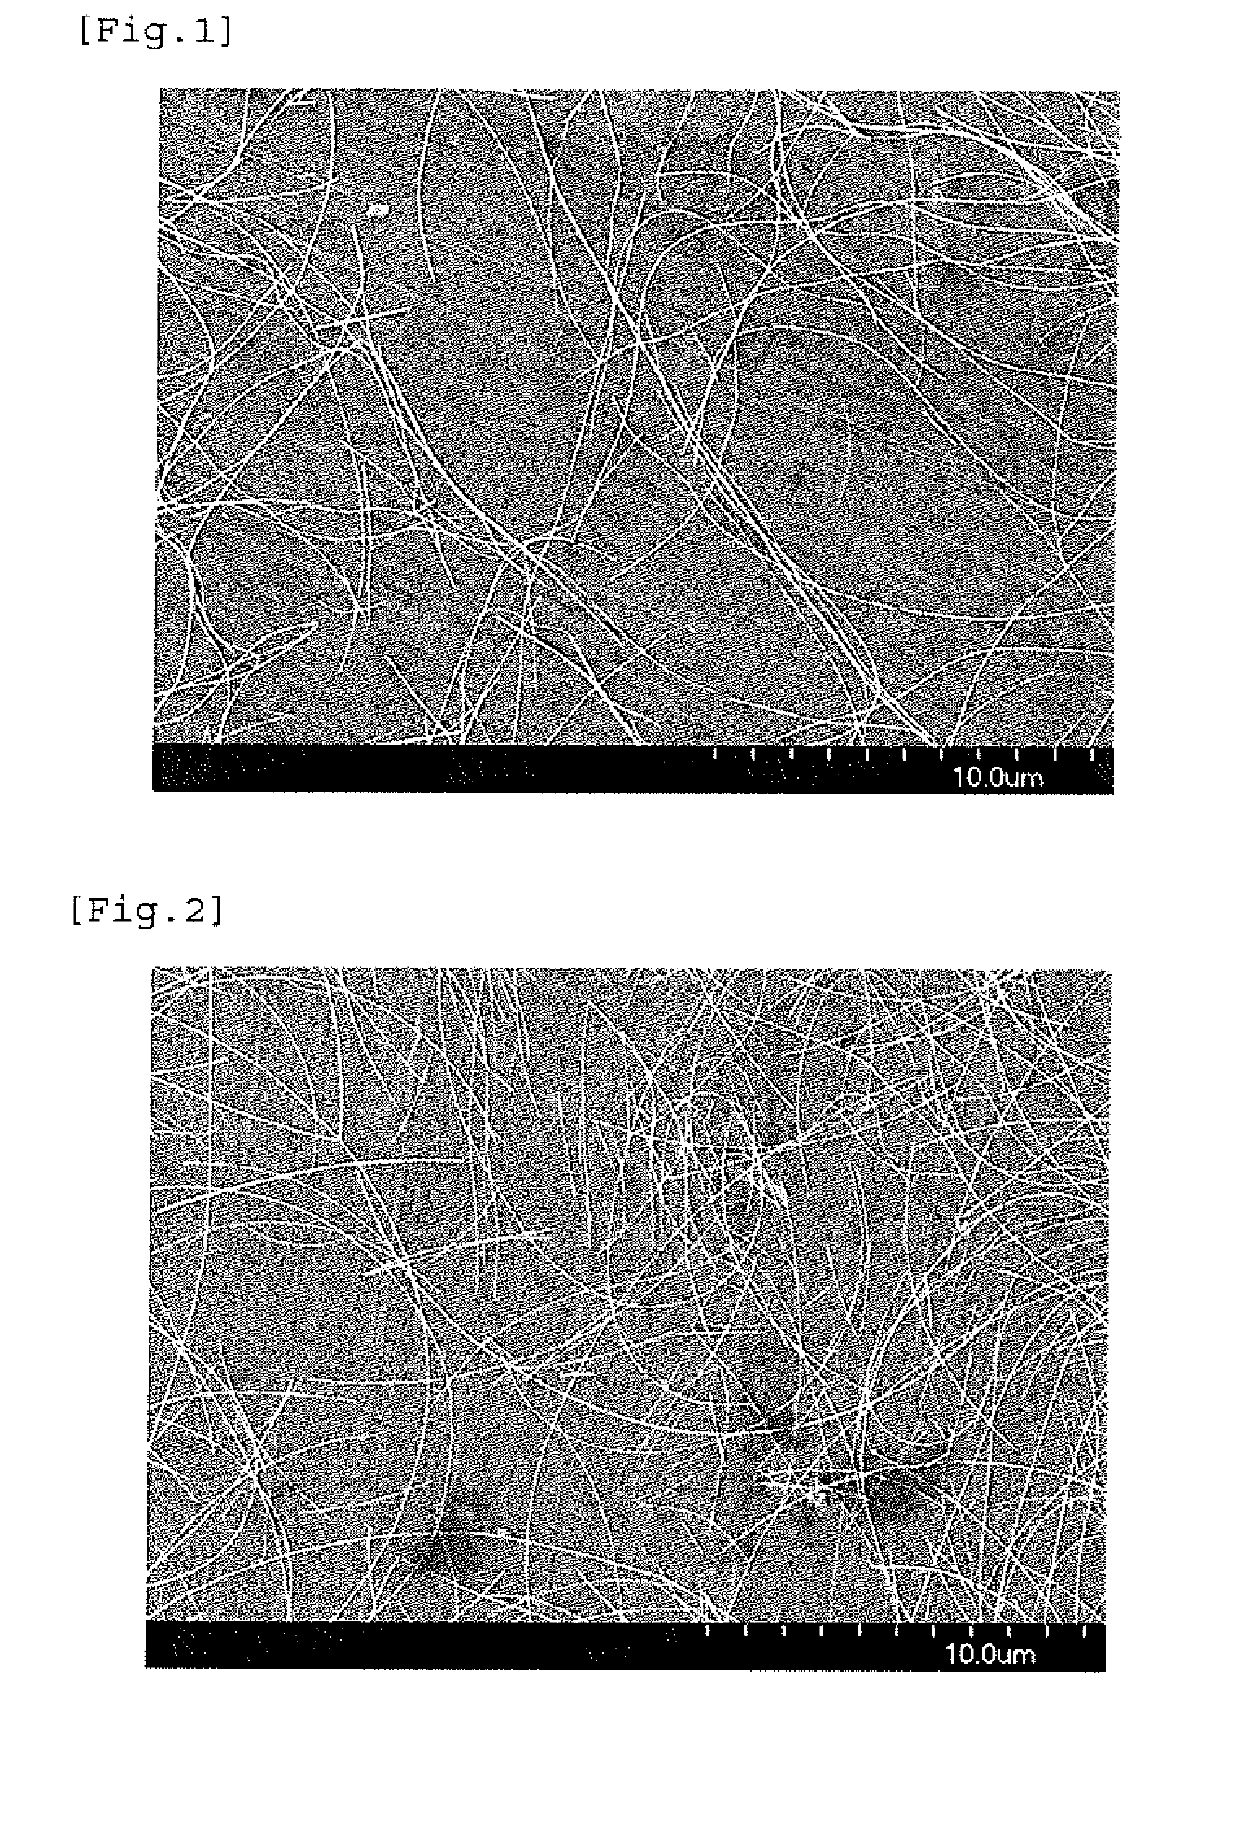 Method for producing silver nanowires